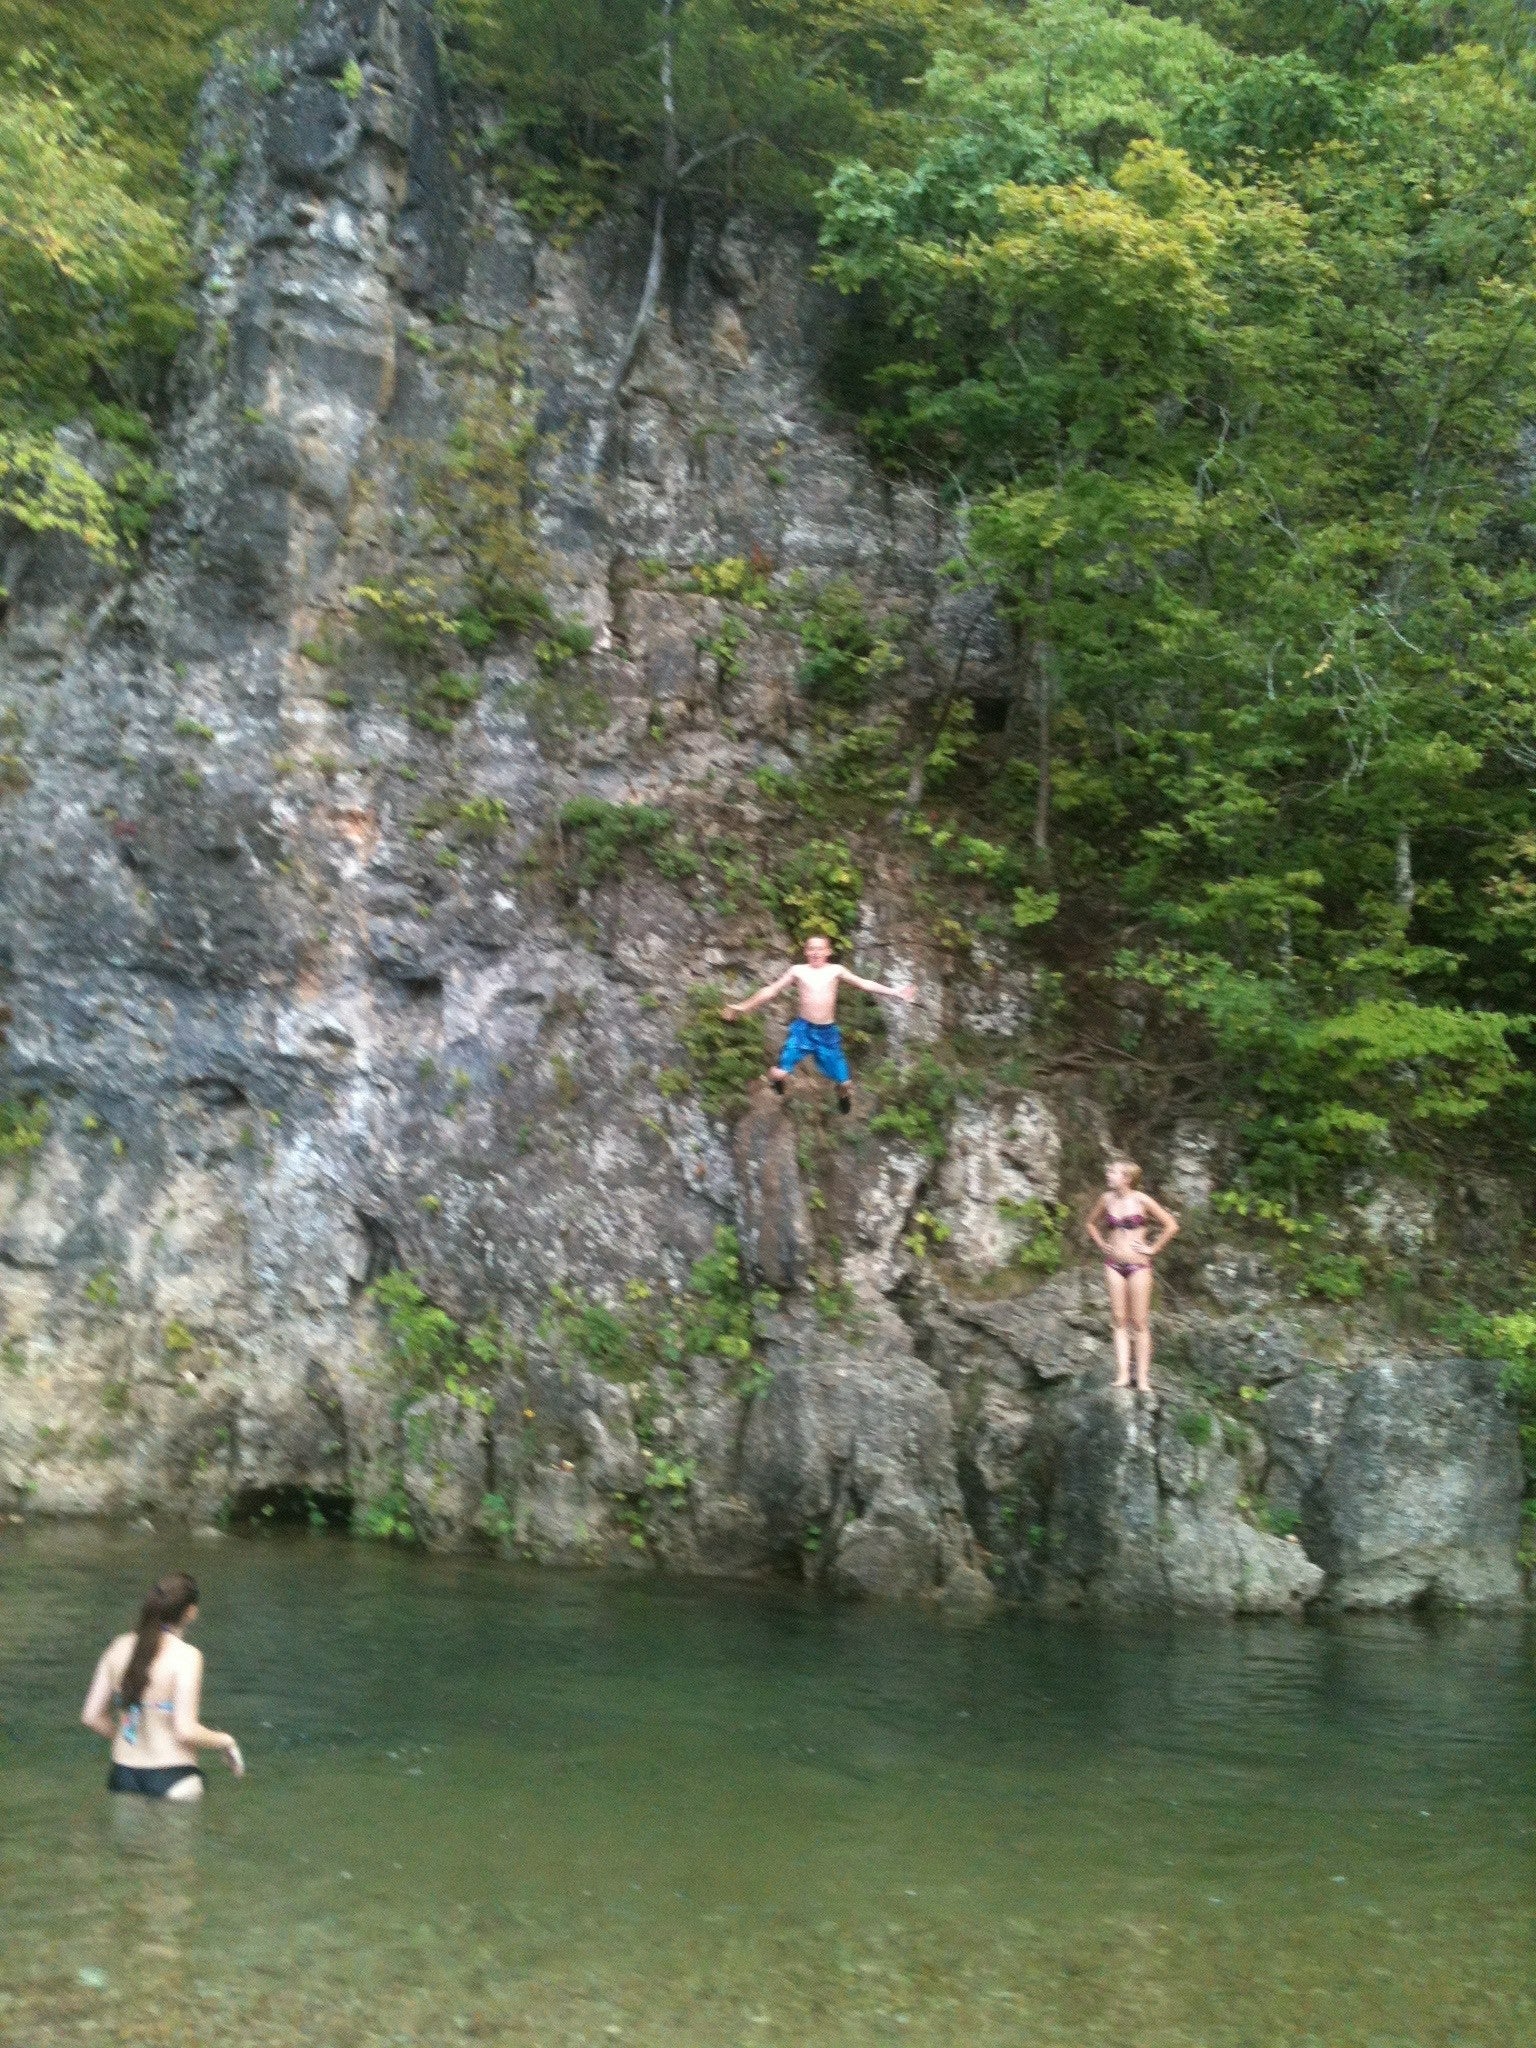 Jumping off the bluffs